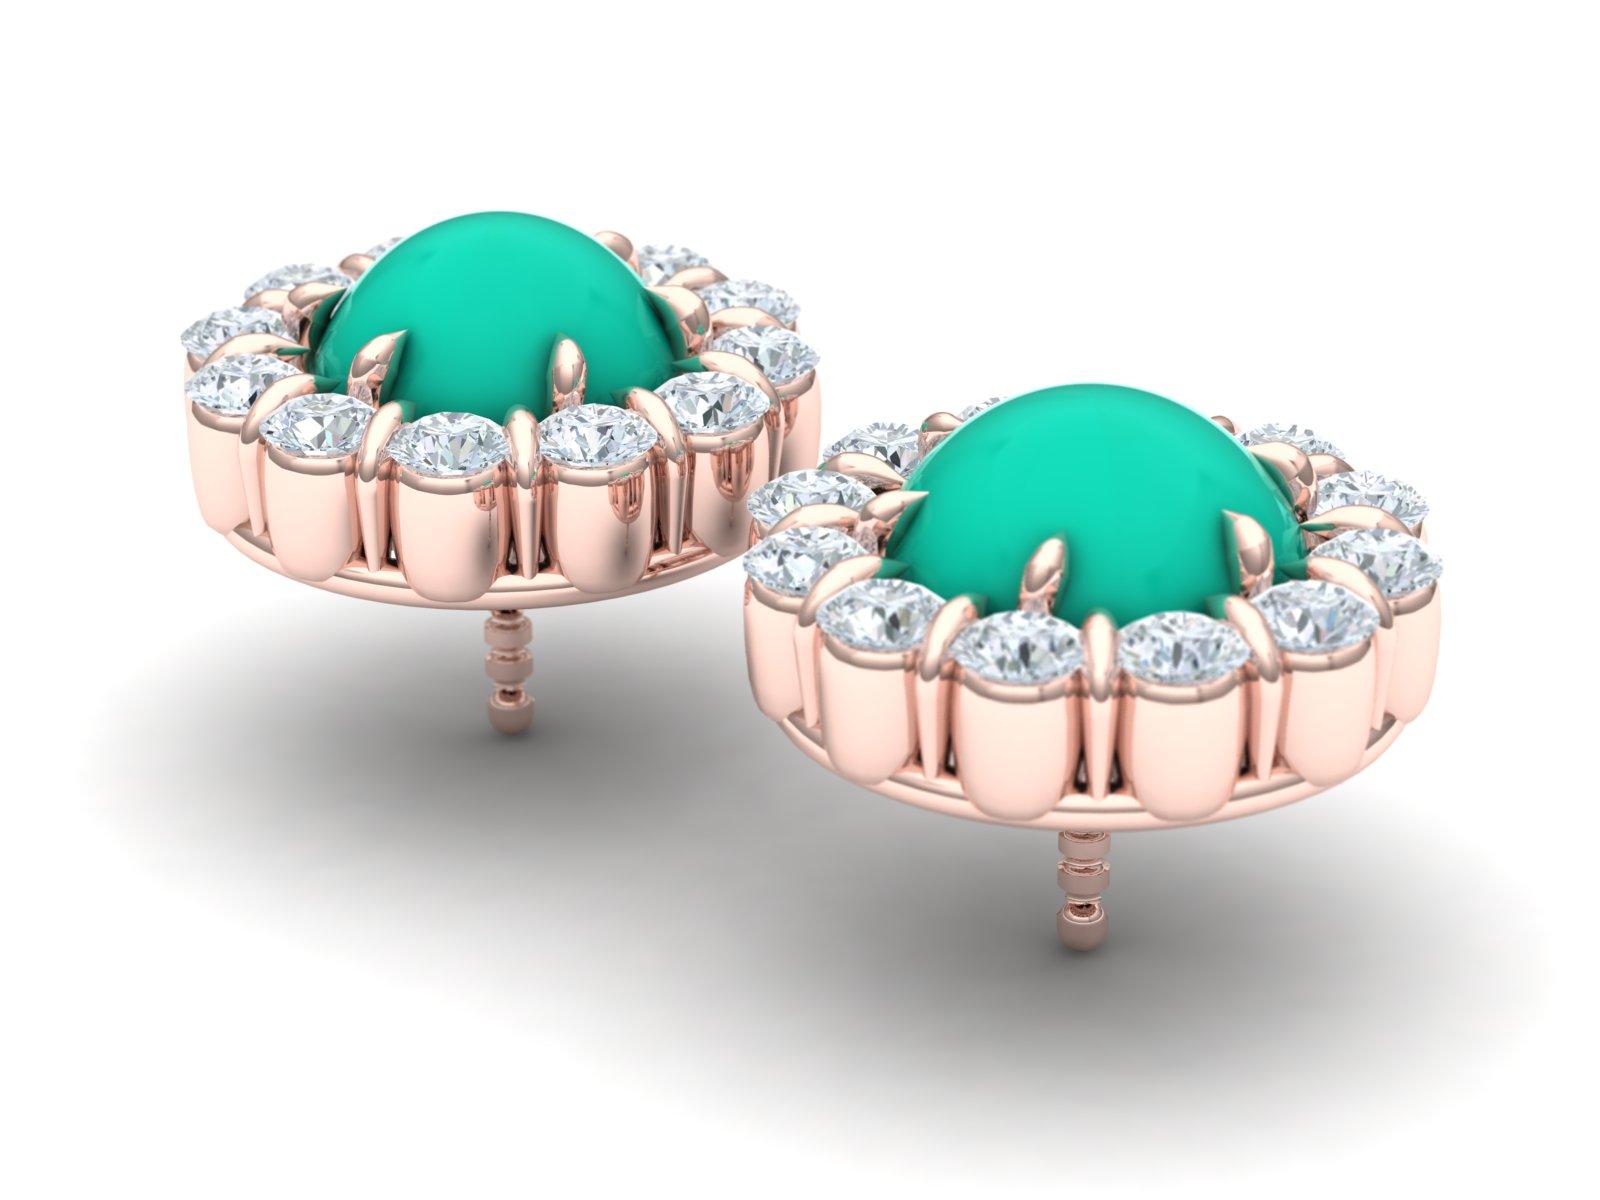 These classic and timeless earrings are a clean crisp white from the diamonds paired with a even teal color turquoise and rose gold.  The center stones of each earring is a round cabochon turquoise that measures apprx. 6mm.  The center stone is